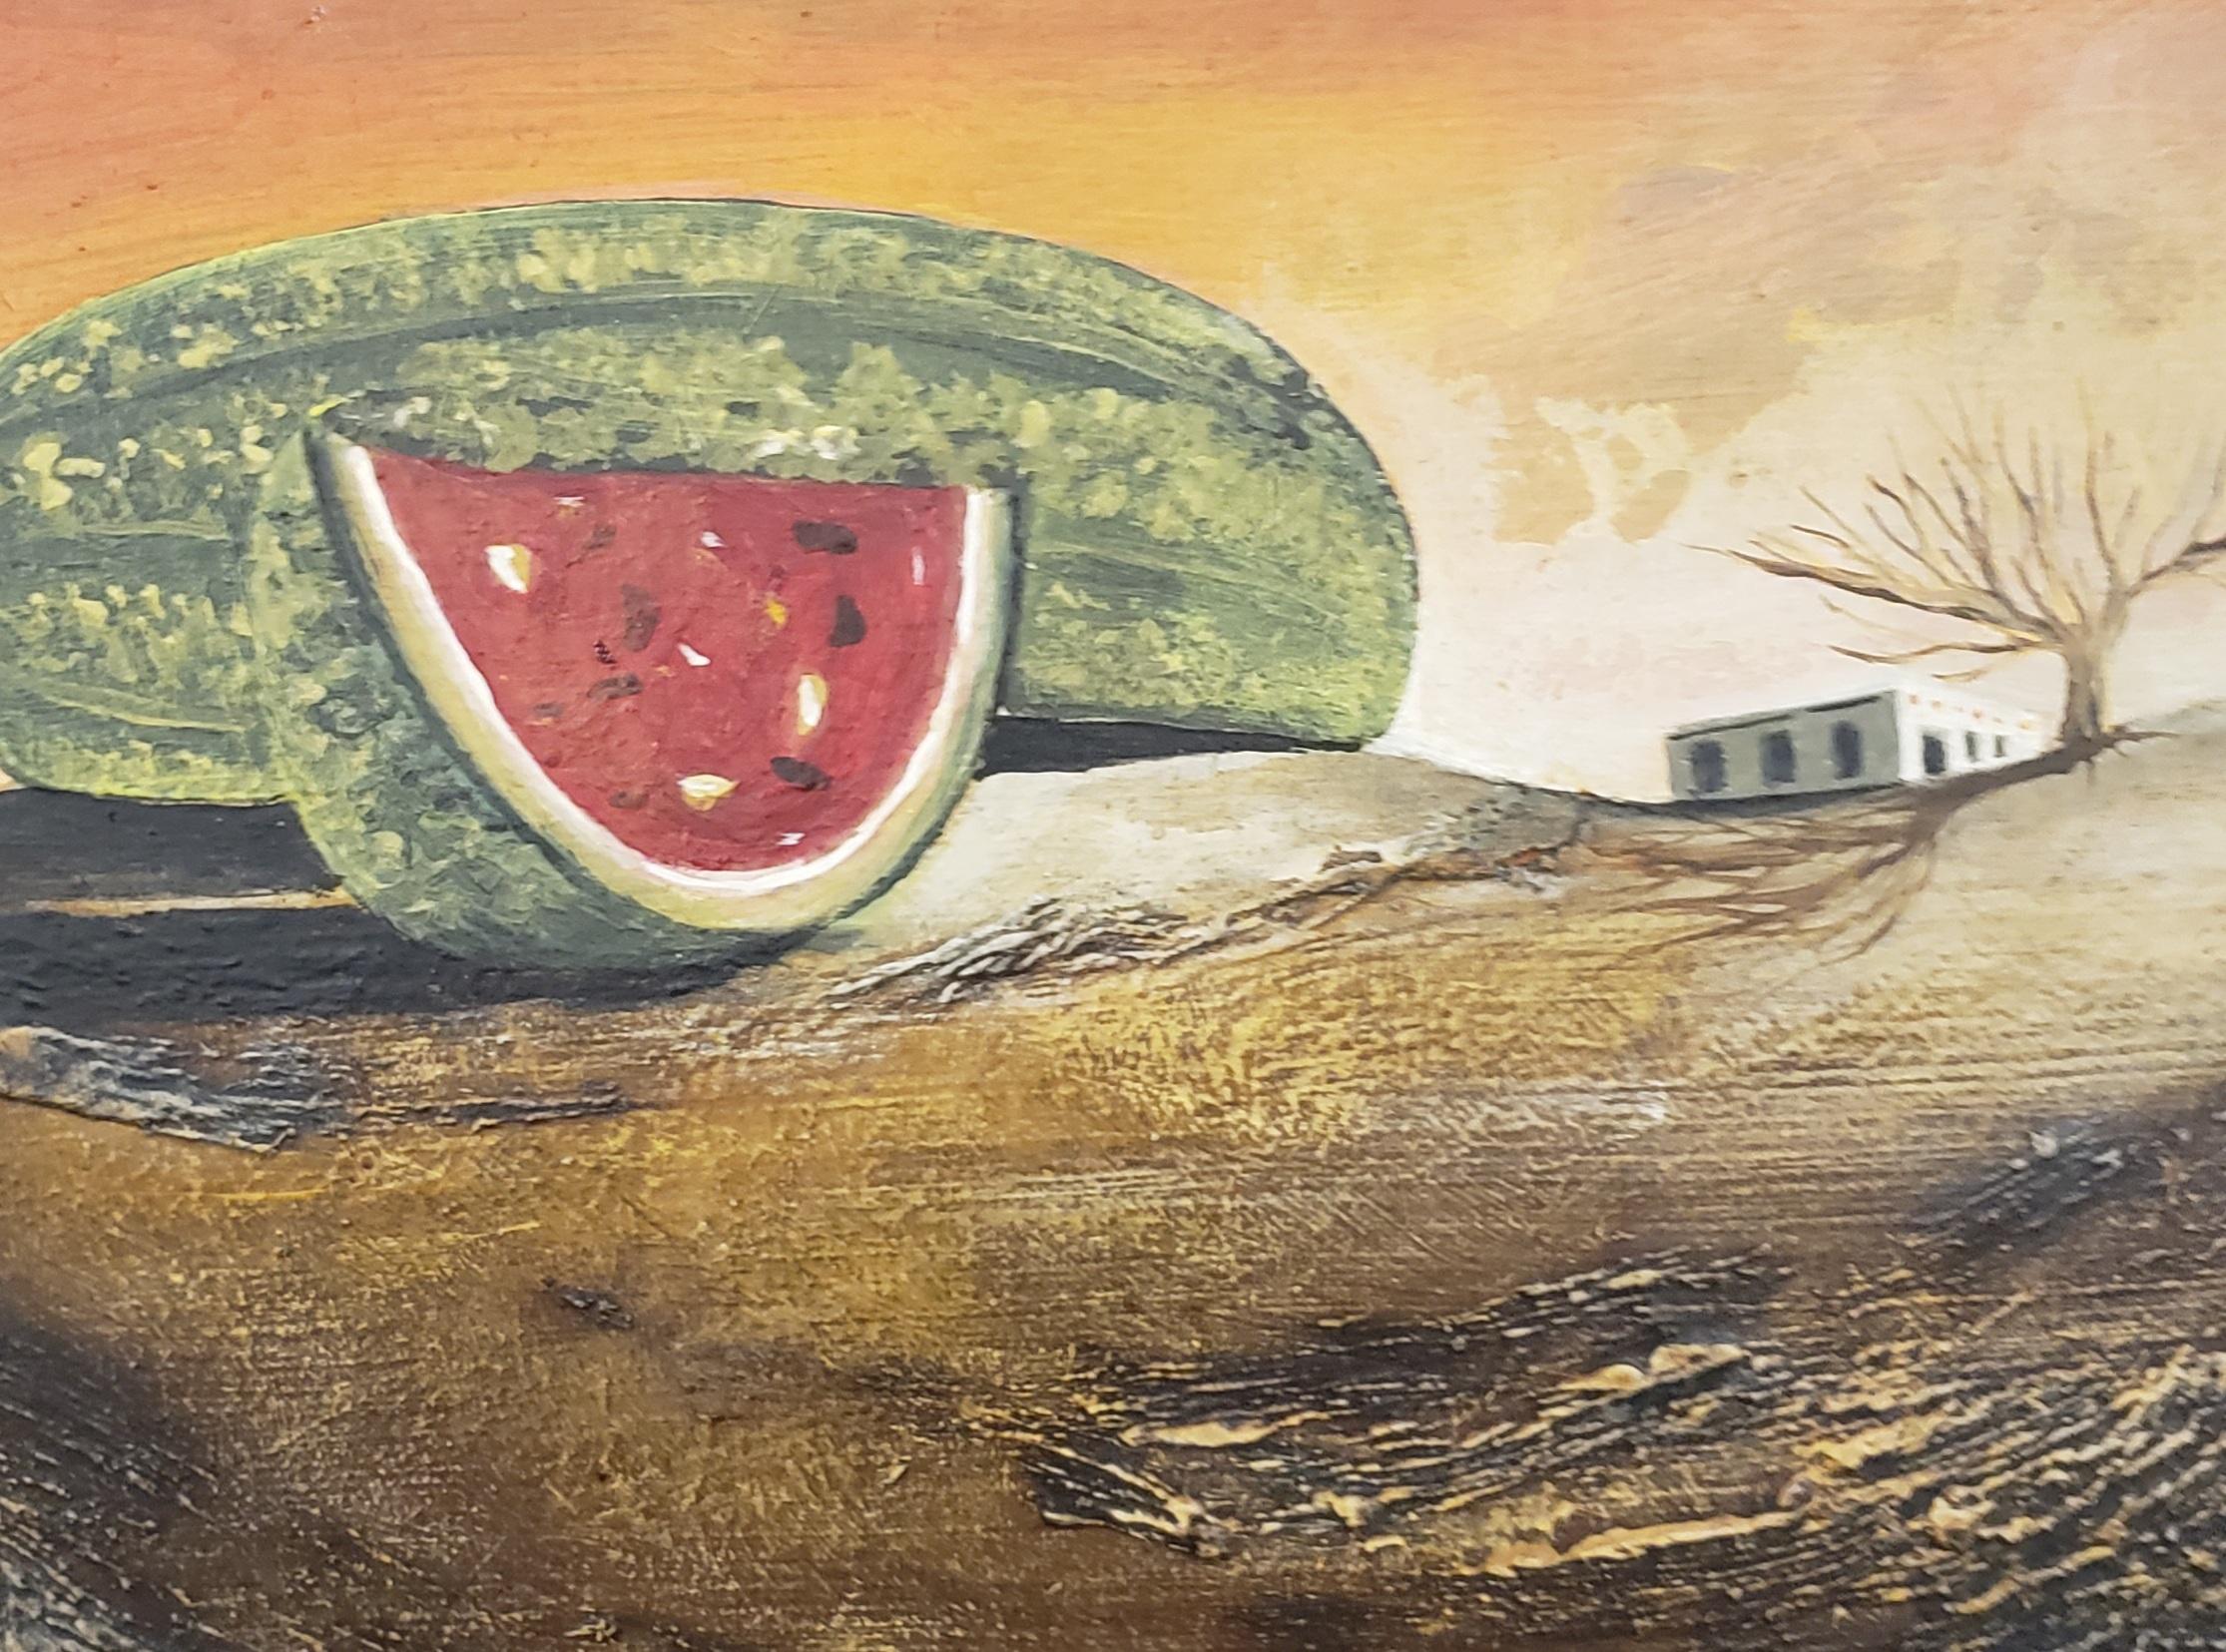 Sandia (Watermelon) Surreal  Emerging Artist  National Academy of Art of Uruguay - Painting by Carlos Duarte